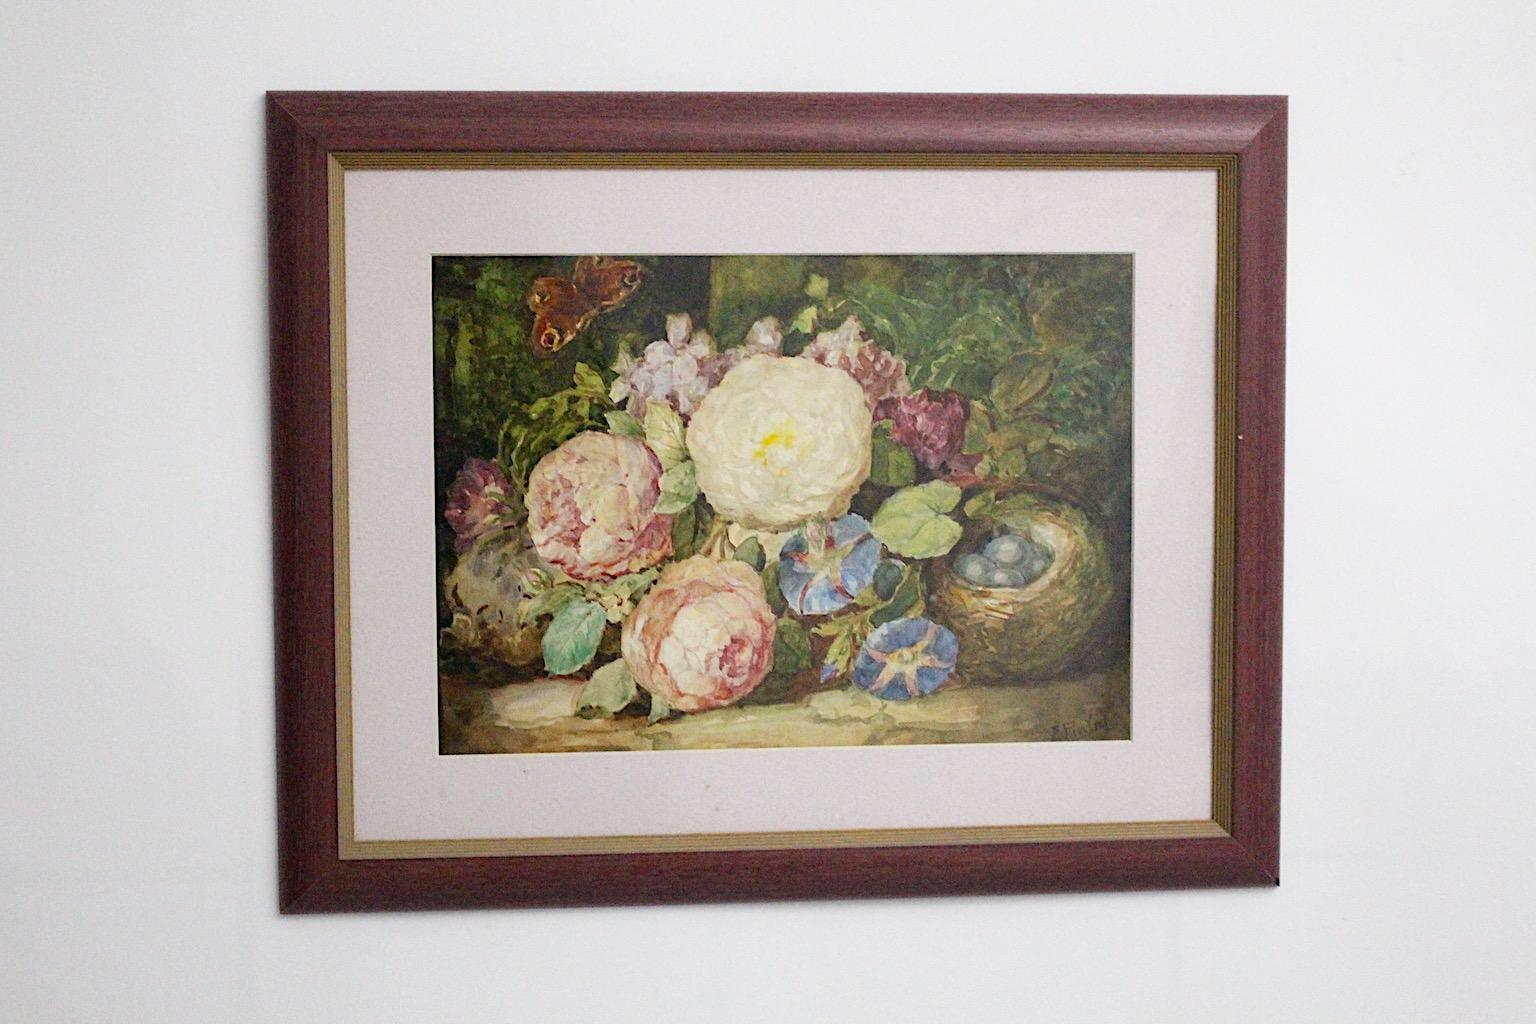 Art Deco painting watercolor on cardboard with passe-partout under glass framed, by Emil Fiala, shows the amazing scene still life with flowers and butterfly in pastel tone colors.
Emil Fiala ( 1869 - 1960 ) was a member of the Austrian